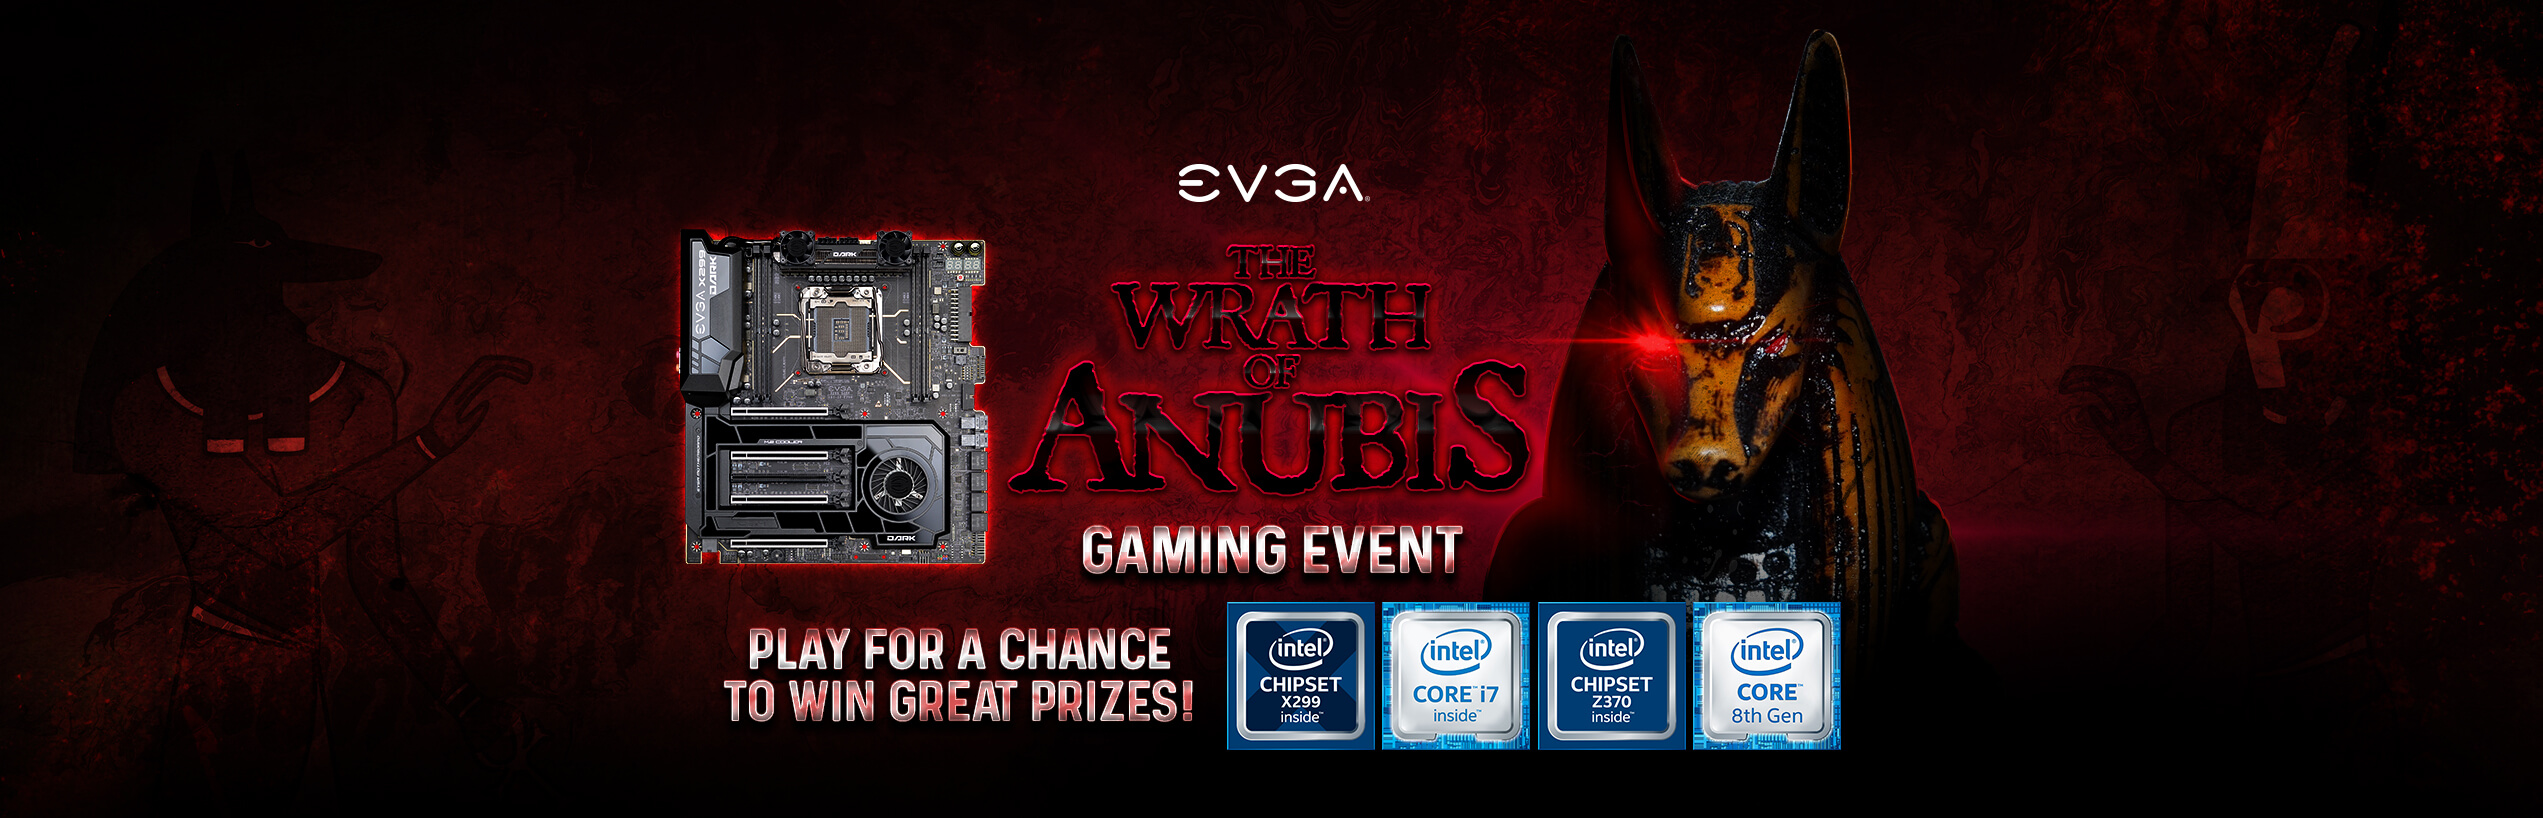 The Wrath of Anubis Gaming Event